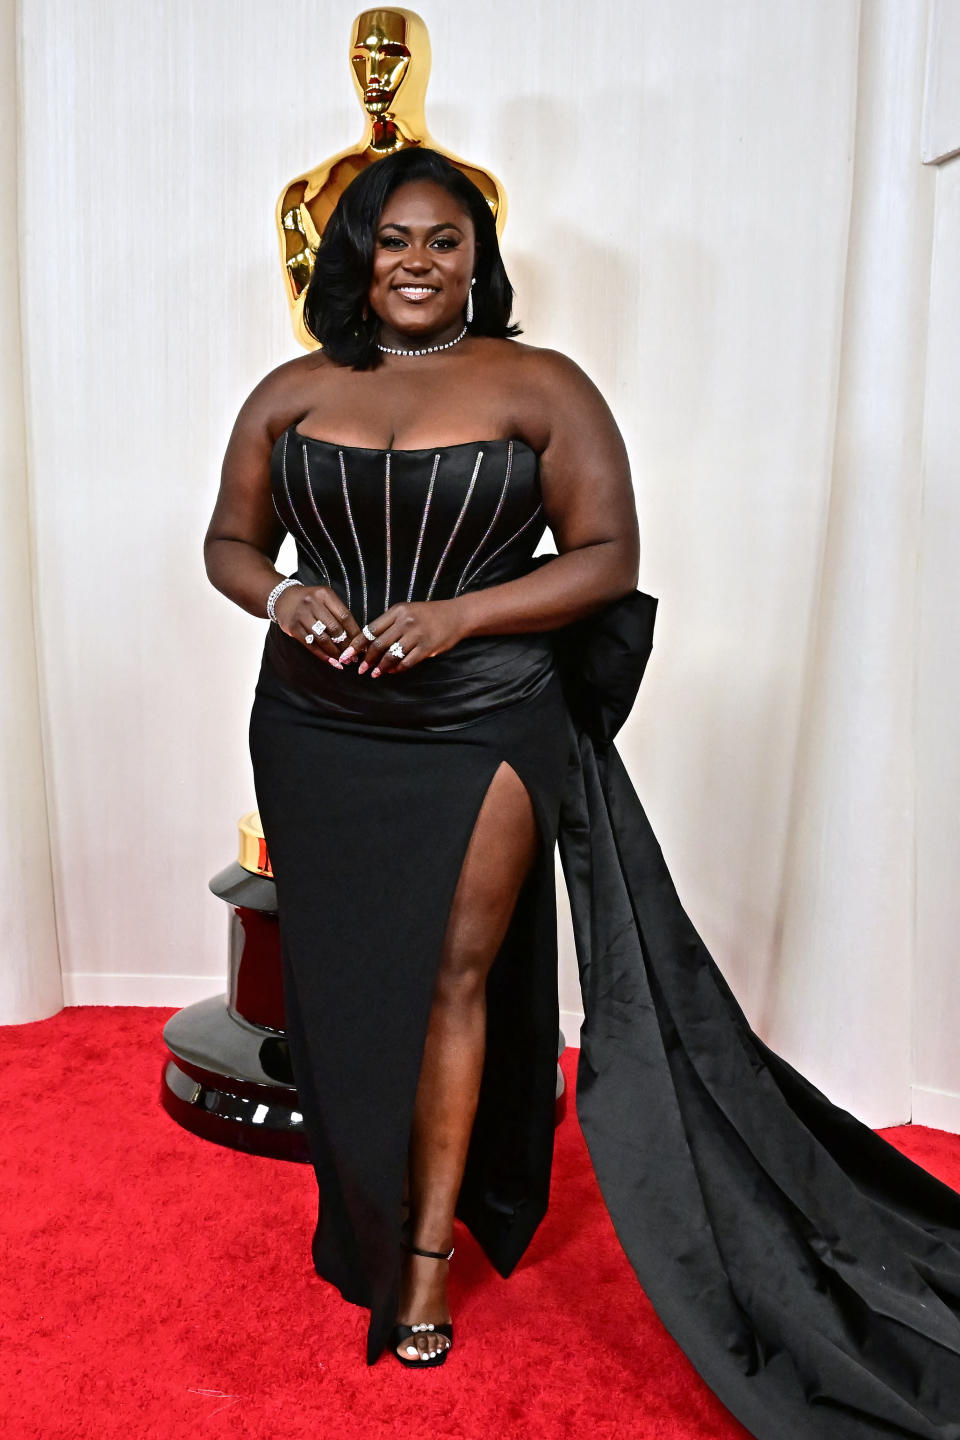 US actress Danielle Brooks attends the 96th Annual Academy Awards at the Dolby Theatre in Hollywood, California on March 10, 2024. (Photo by Frederic J. Brown / AFP) (Photo by FREDERIC J. BROWN/AFP via Getty Images)